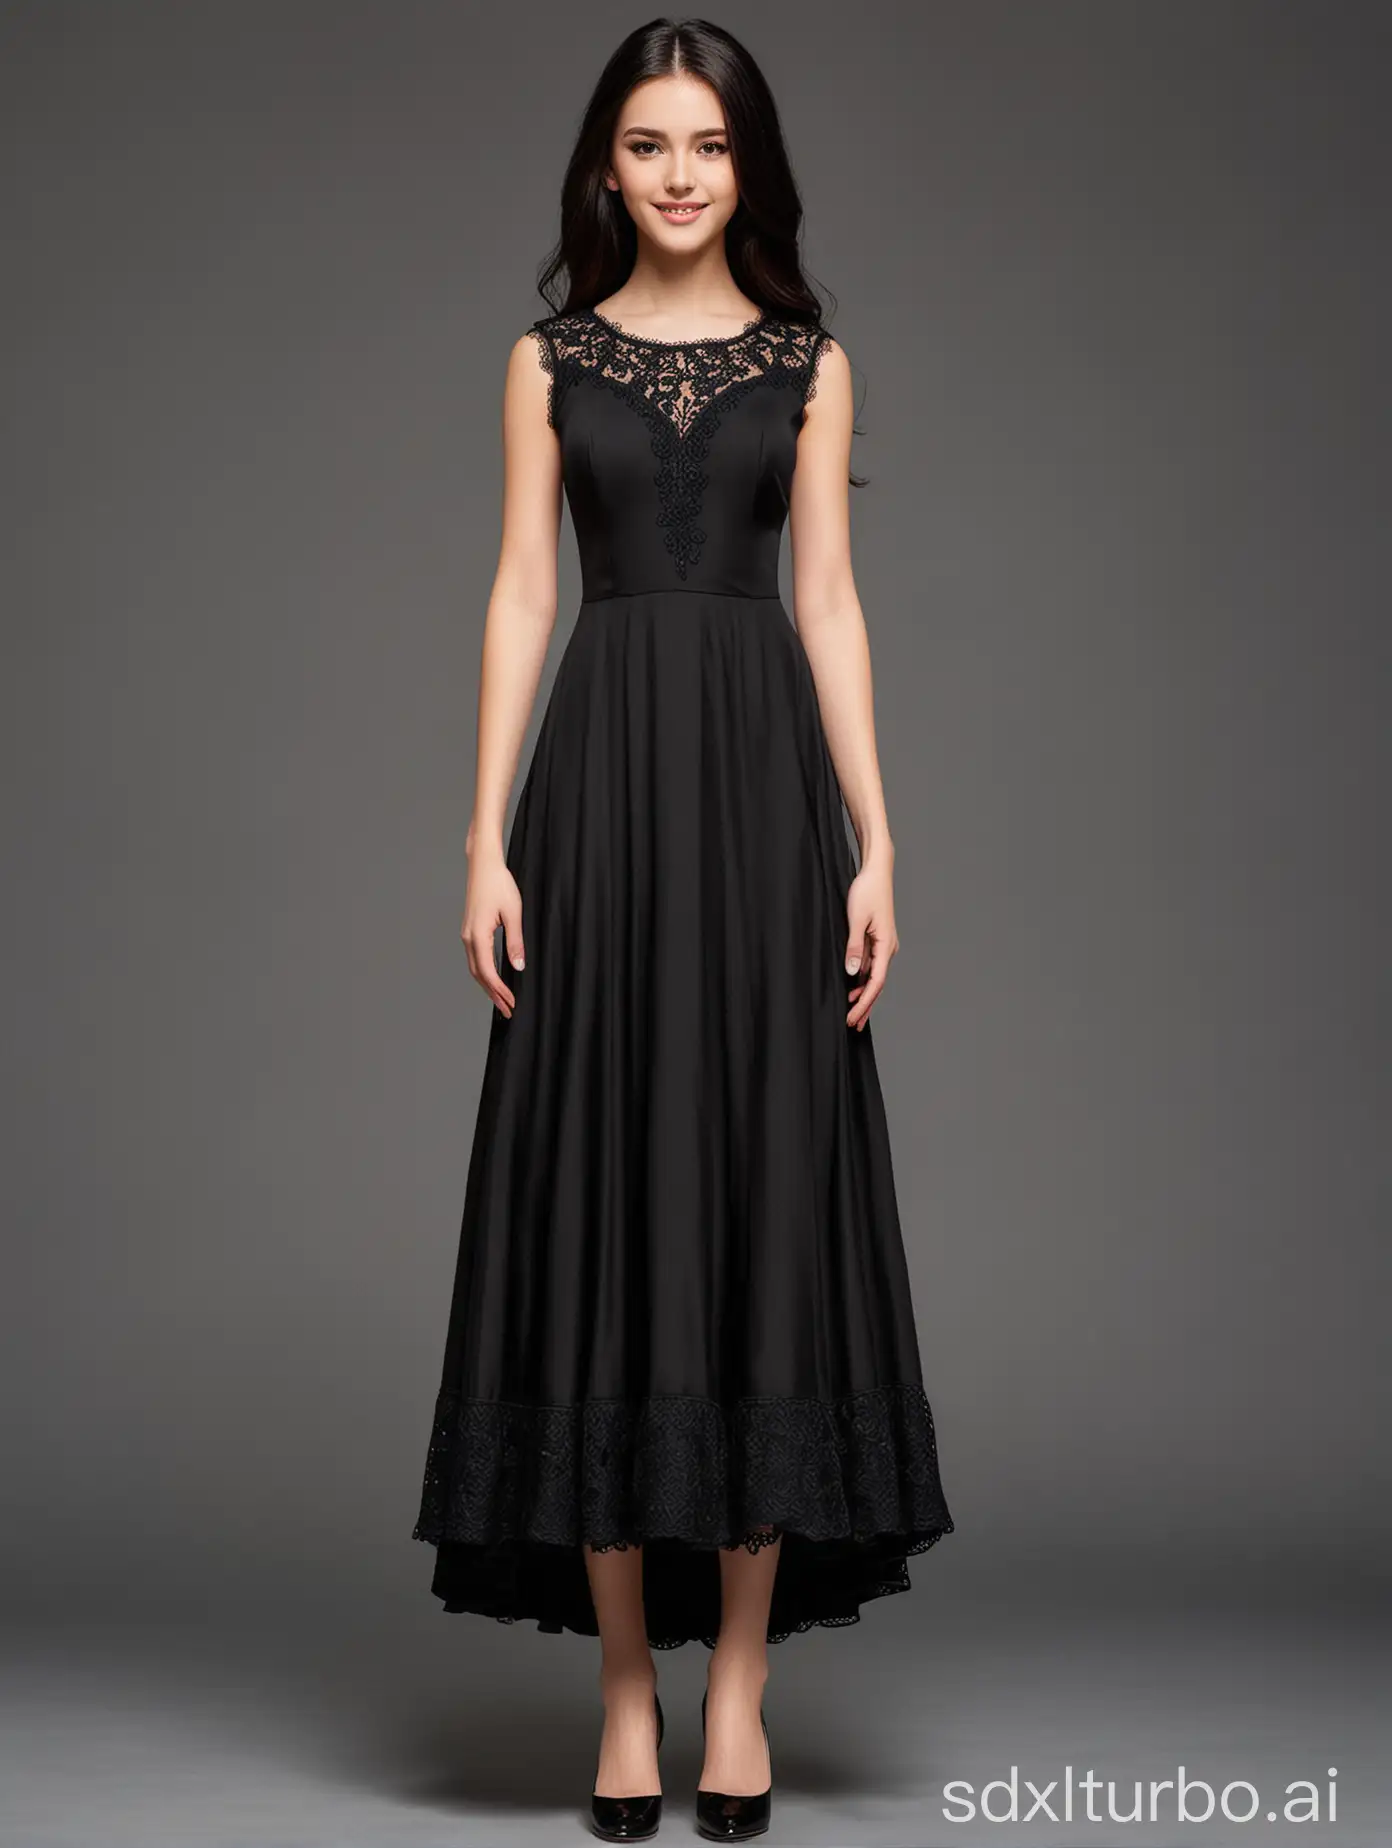 Character: A young, tall, slender girl with black eyes and black long hair, wearing a stunning black long dress. This dress features a round neckline and sleeveless design, with an unslit skirt down to the barefoot, highlighting the elegance of the outfit. Dress details: made of polyester fiber, with lace trim at the neckline, tailored fit. Pose: standing beside the city road; Shoes: paired with exquisite open-toe high heels, complementing the fashion of the dress.